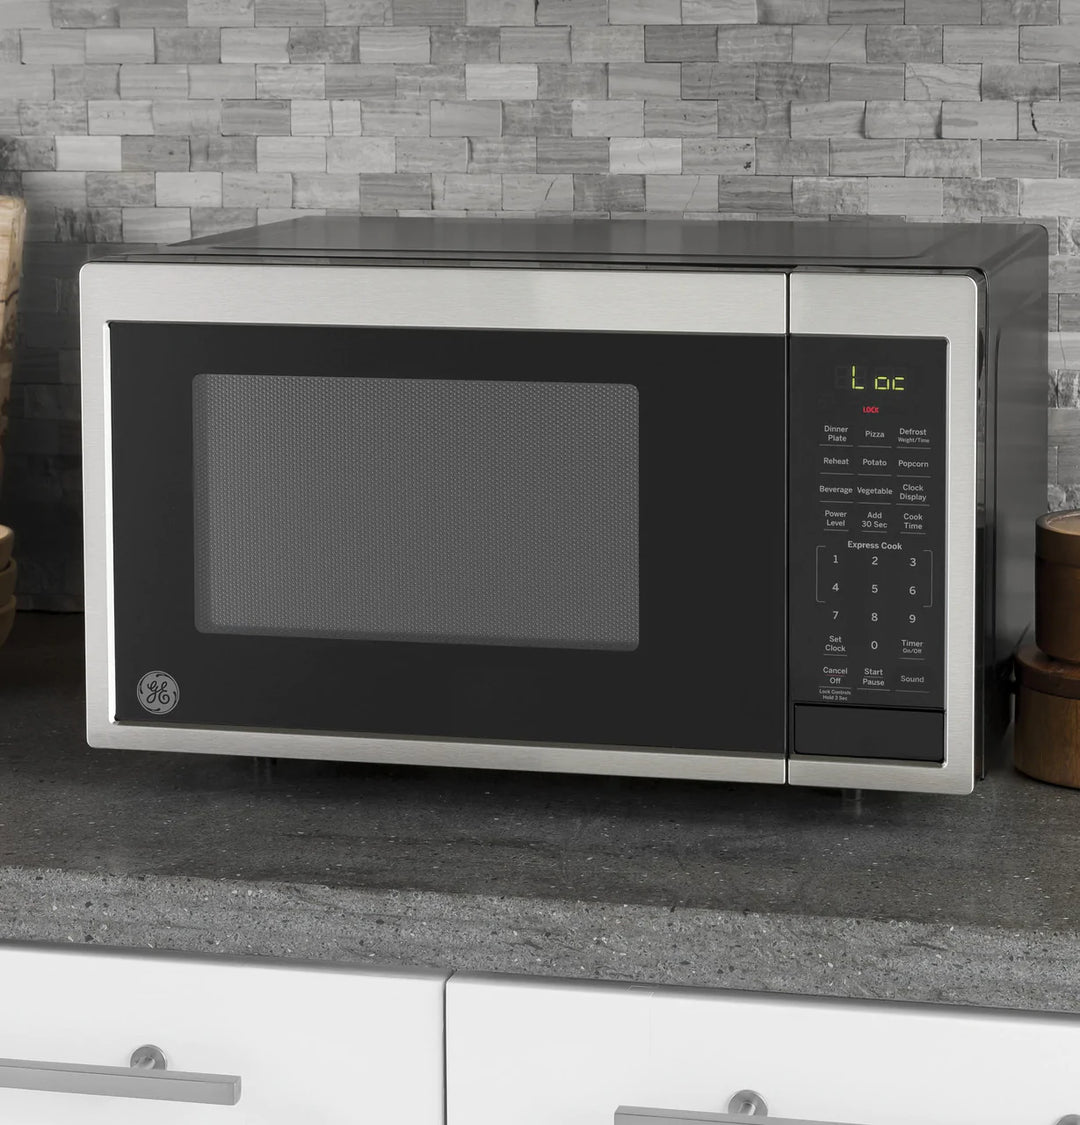 GE Appliances 25 L/ 0.9 Cu. Ft. Capacity Digital Countertop Microwave Oven JES1095SMSS